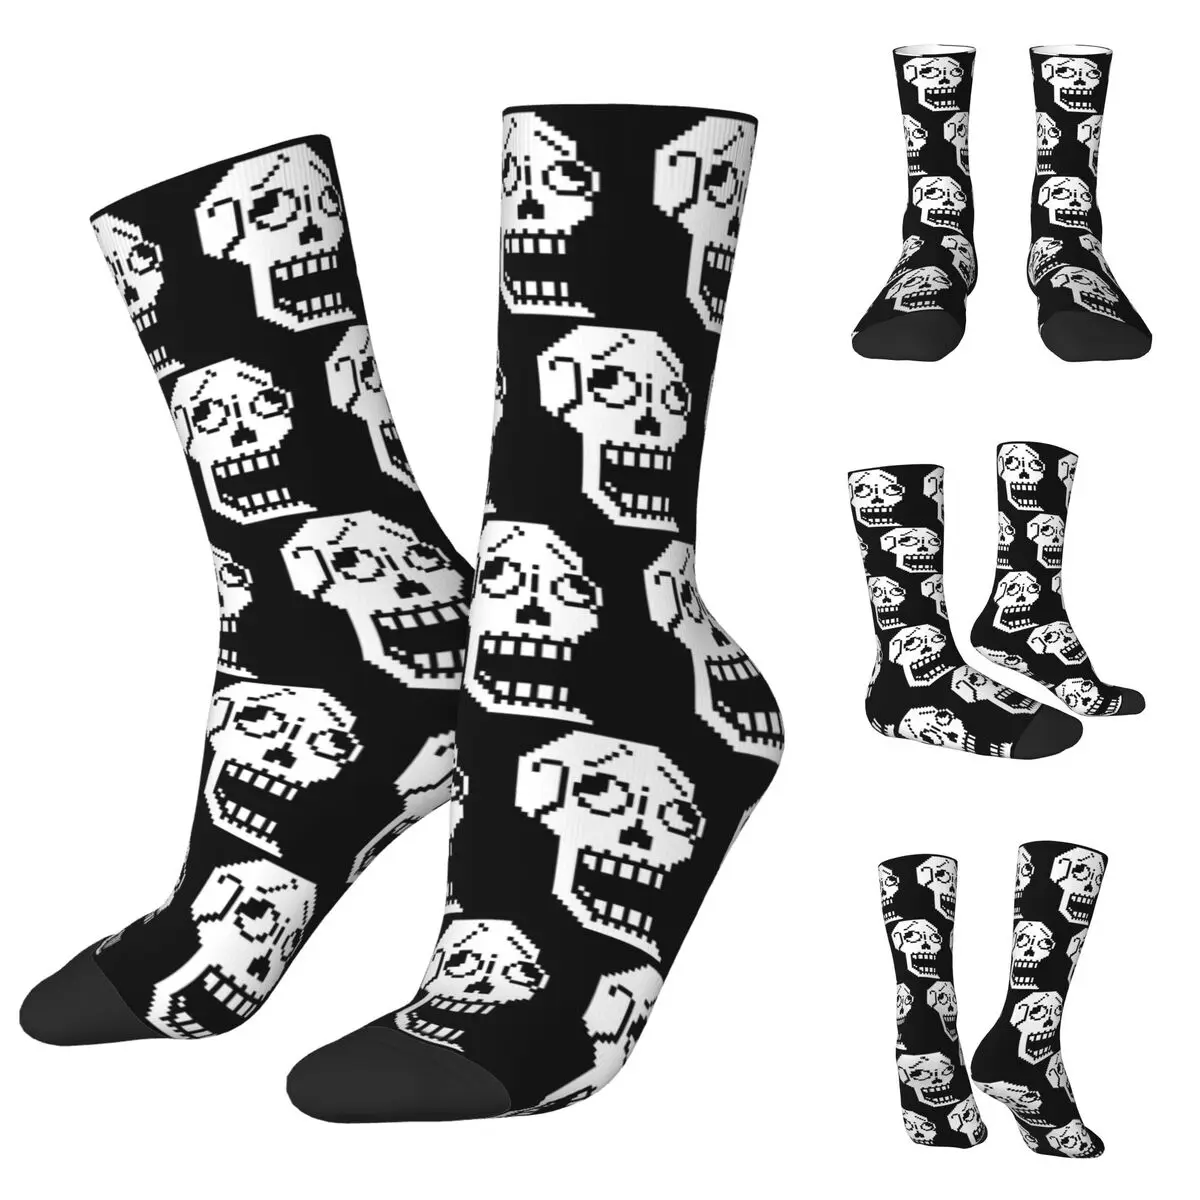 Sans And Papyrus Sprites Undertale Napstablook Men and Women printing Socks,Windproof Applicable throughout the year martial solal exposition sans tableau 1 cd